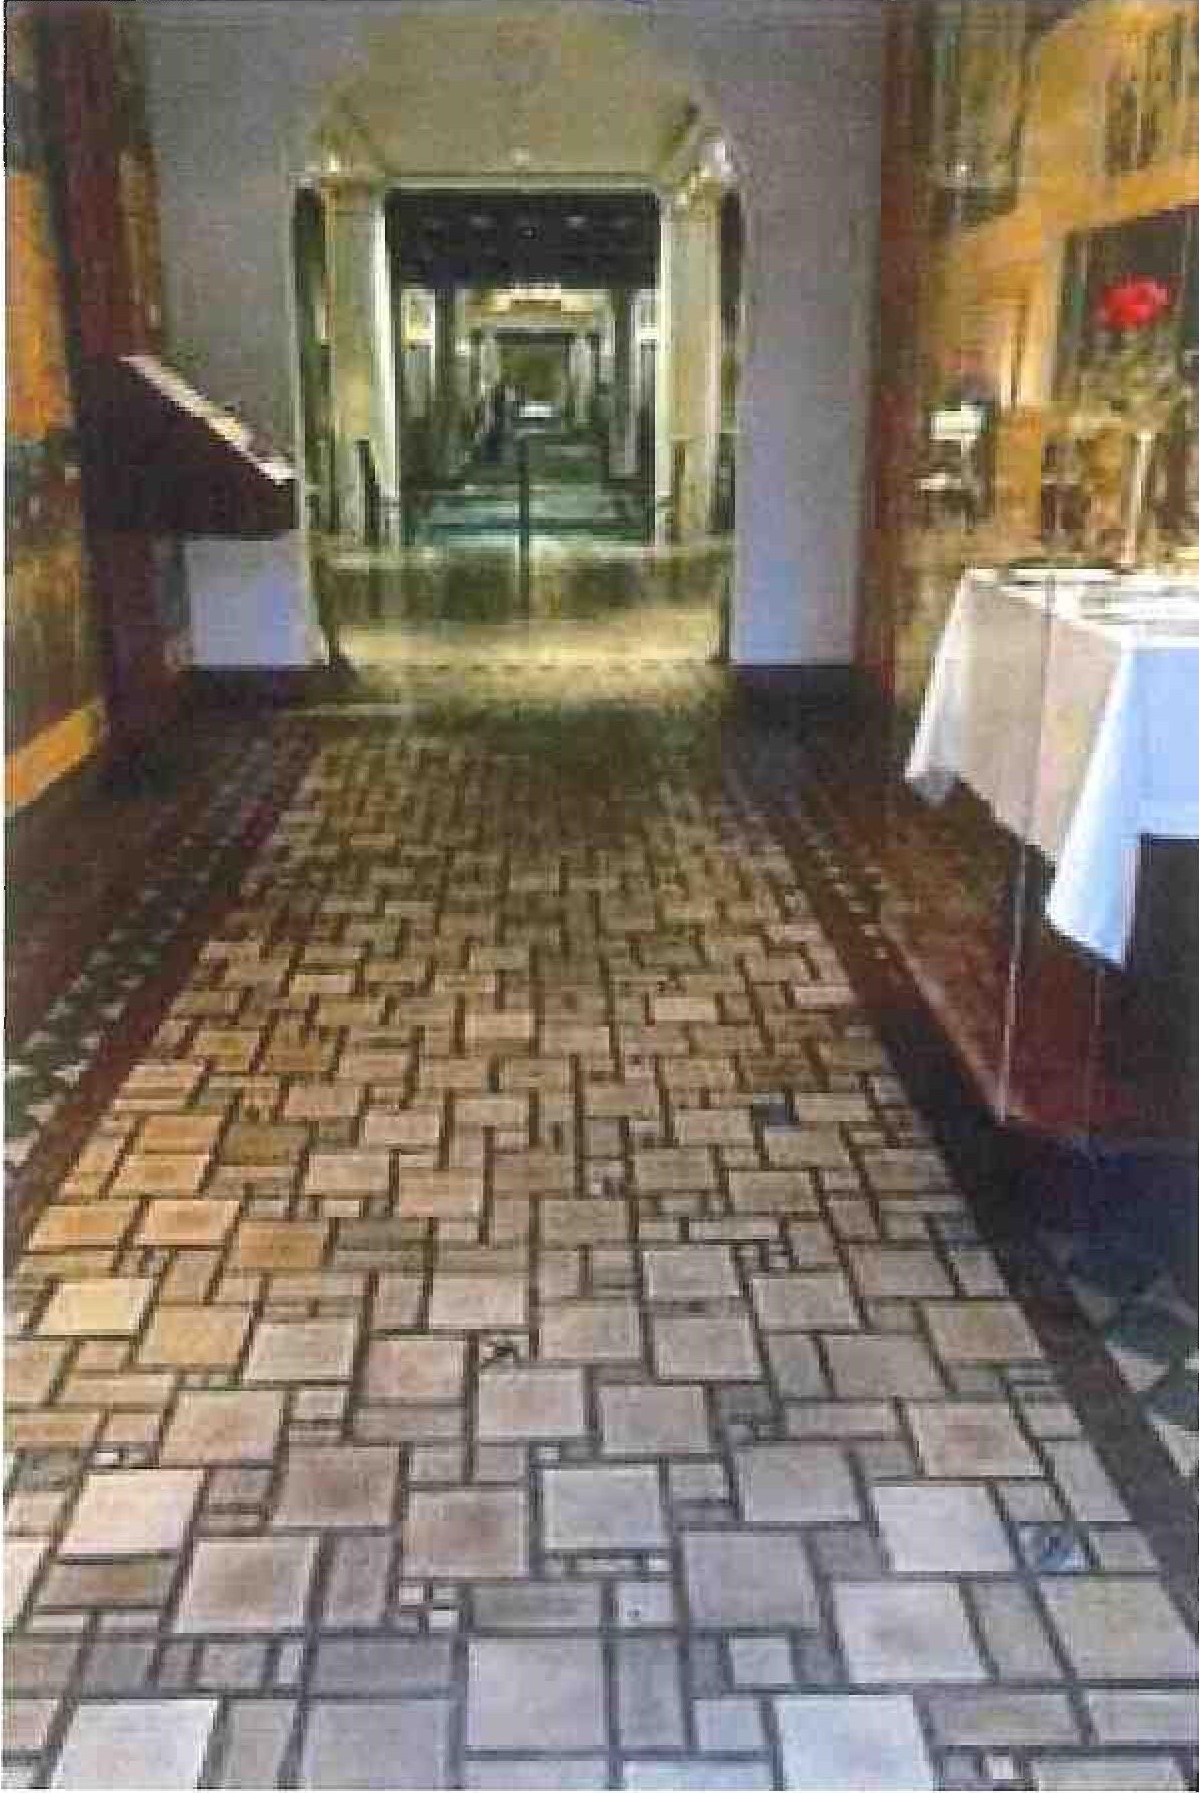 Random field tile patterns and borders were composed of vitreous grès or glazed tiles with a wide variation of color if desired.